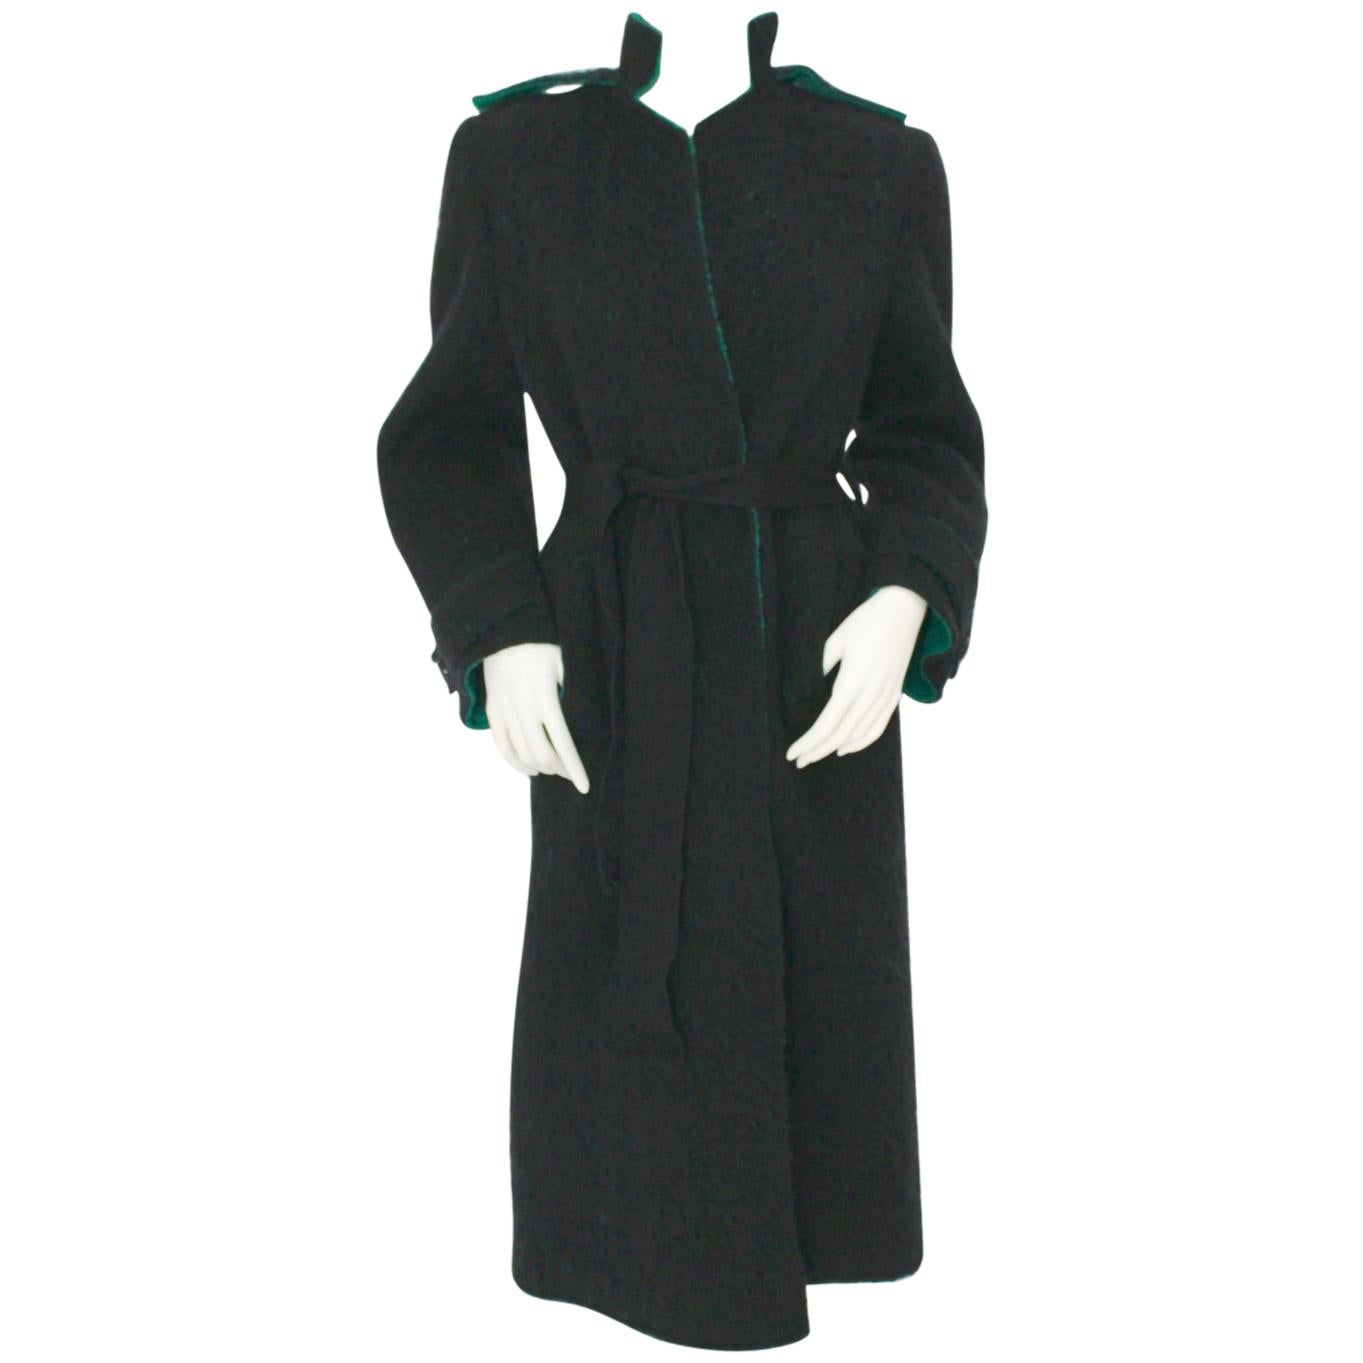 Lancetti Roma Vintage Black and Green Wool Coat 1970s For Sale